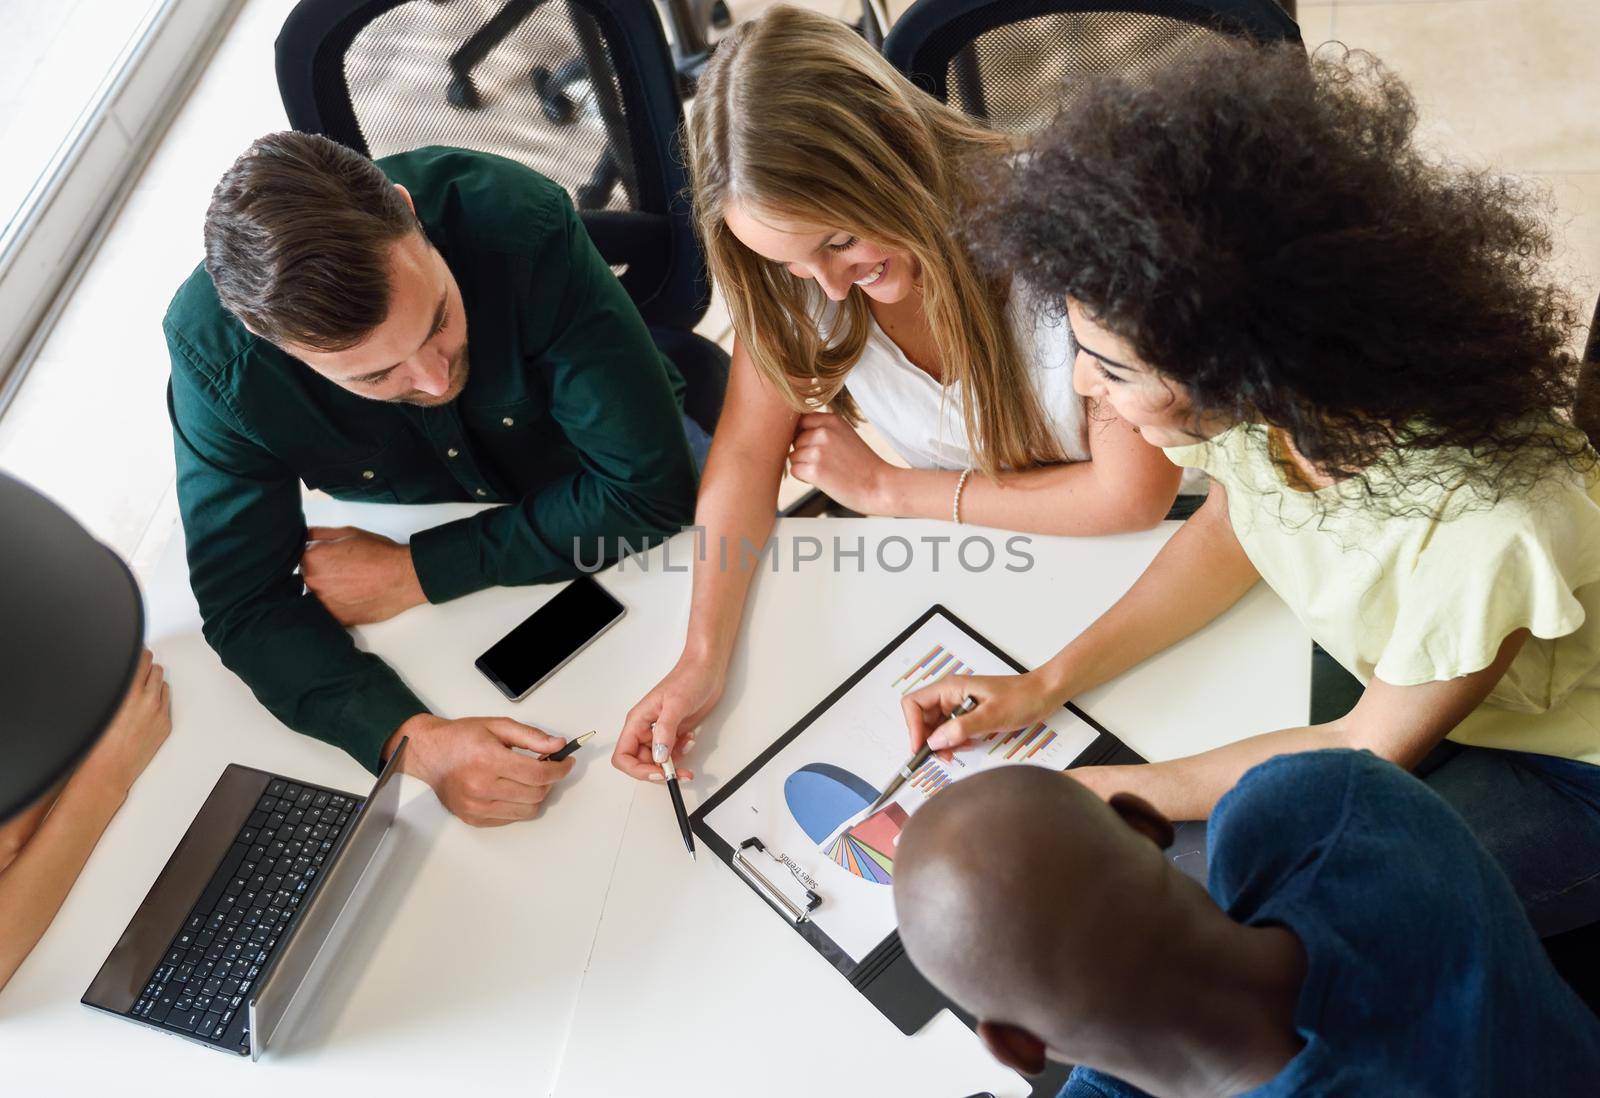 Young people studying with laptop computer on white desk. Beautiful women and men working together wearing casual clothes. Multi-ethnic group. Top view